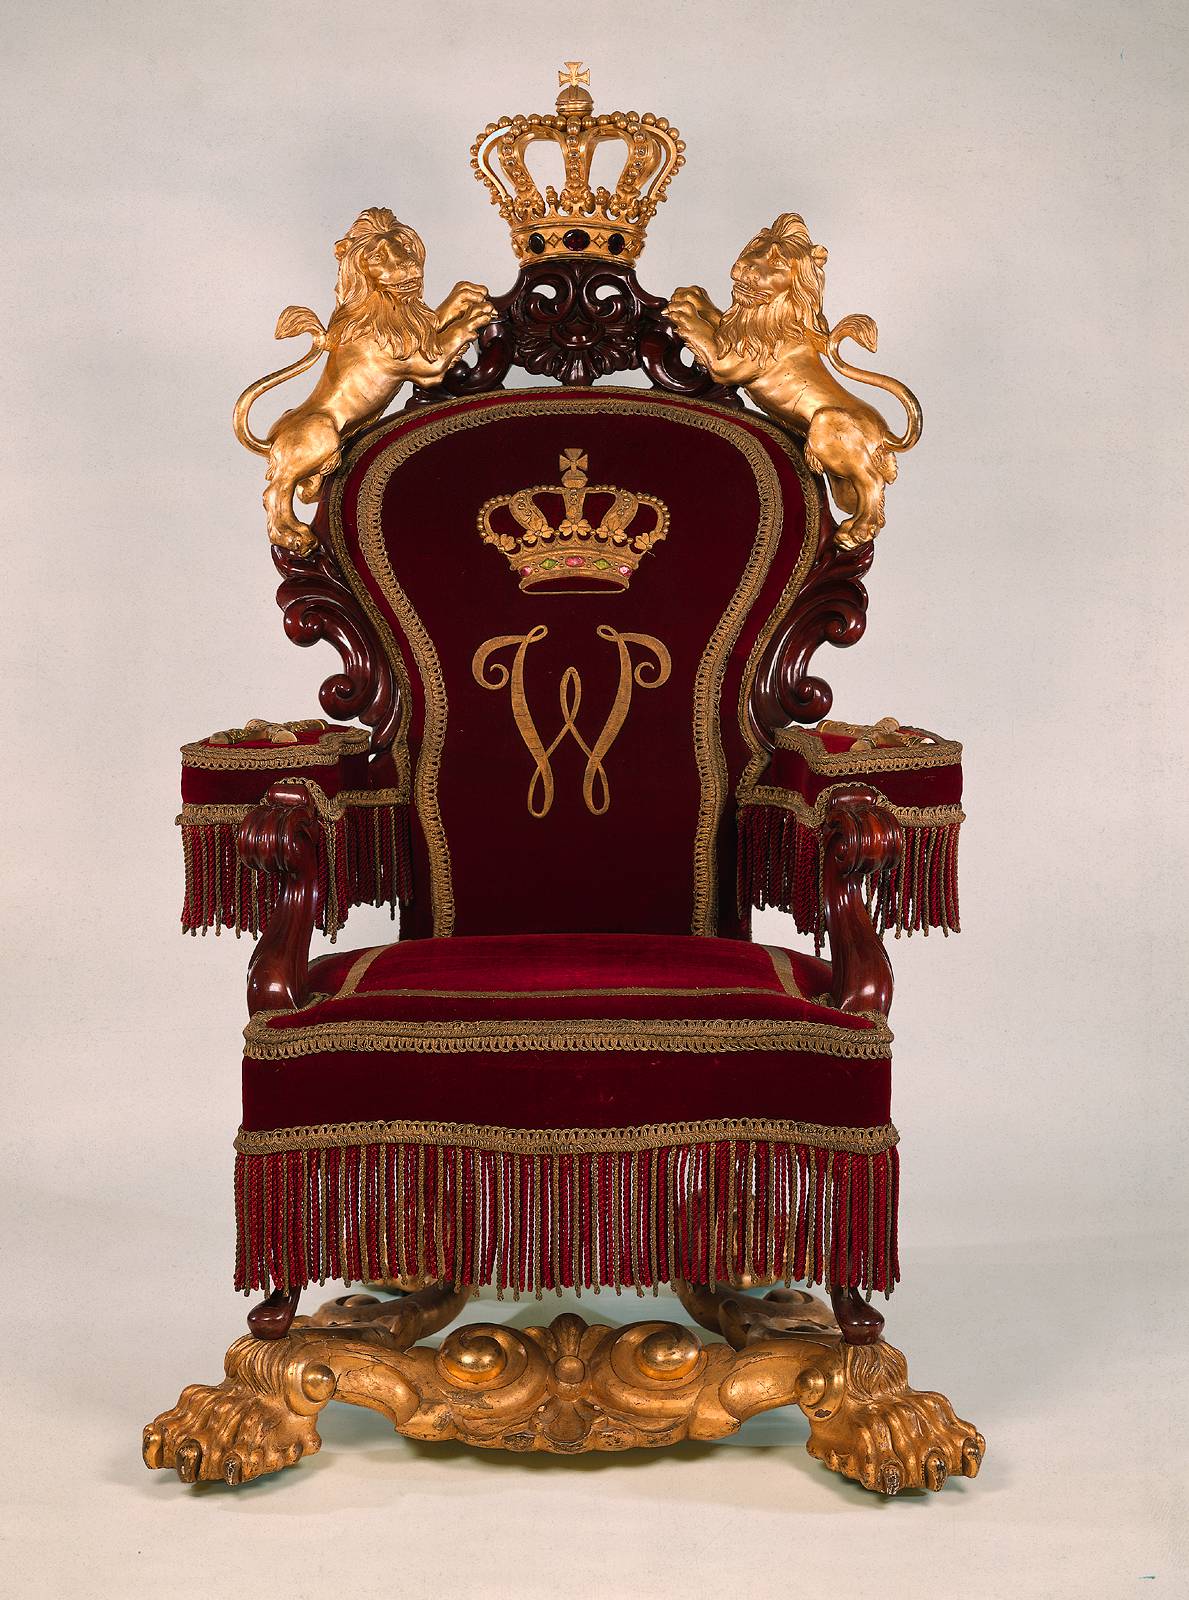 A Royal Throne by the Horrix Brothers Anna Palowna.eu. Royal throne, Throne chair, King throne chair